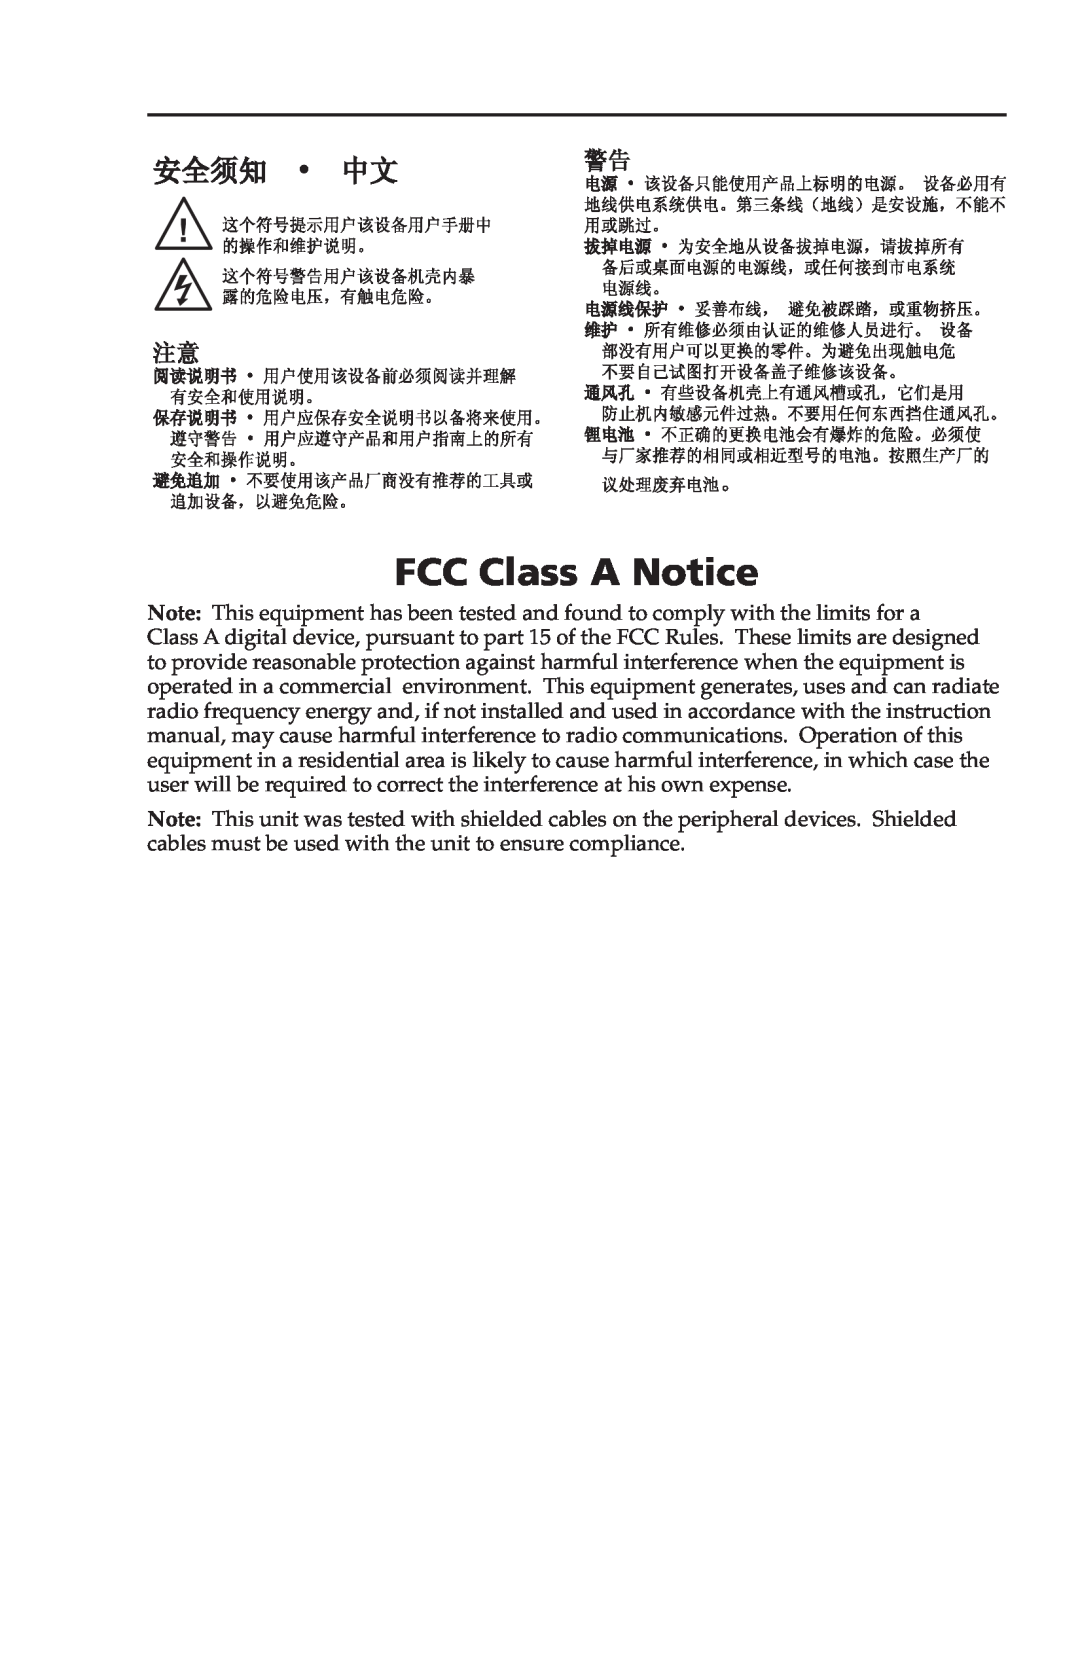 Extron electronic PS 123 manual FCC Class A Notice 